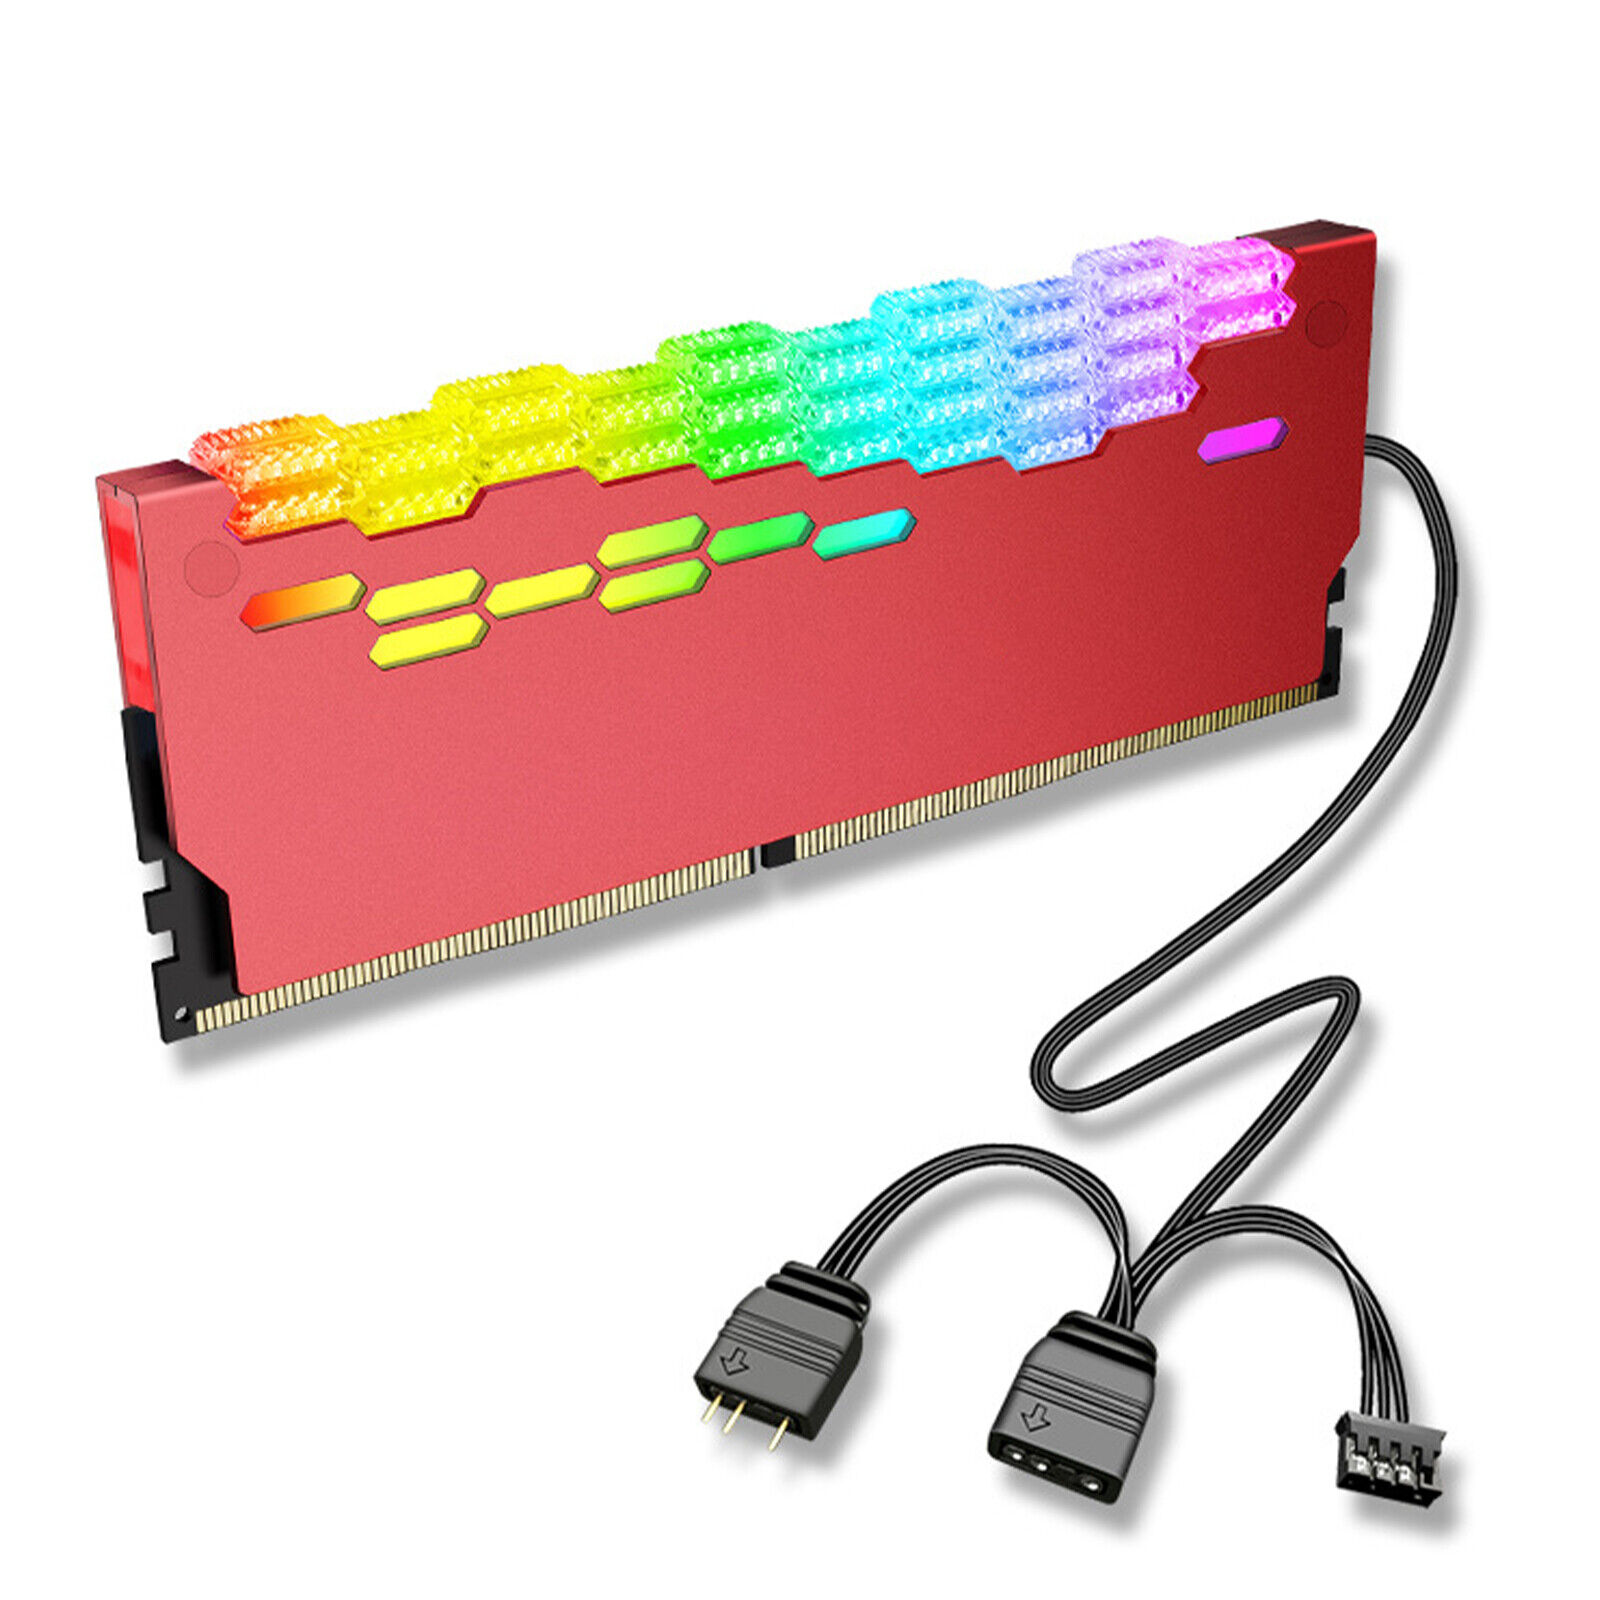 COOLMOON RA-2 RAM Heat Sink Cooler ARGB Colorful Heat Spreader for PC Computer